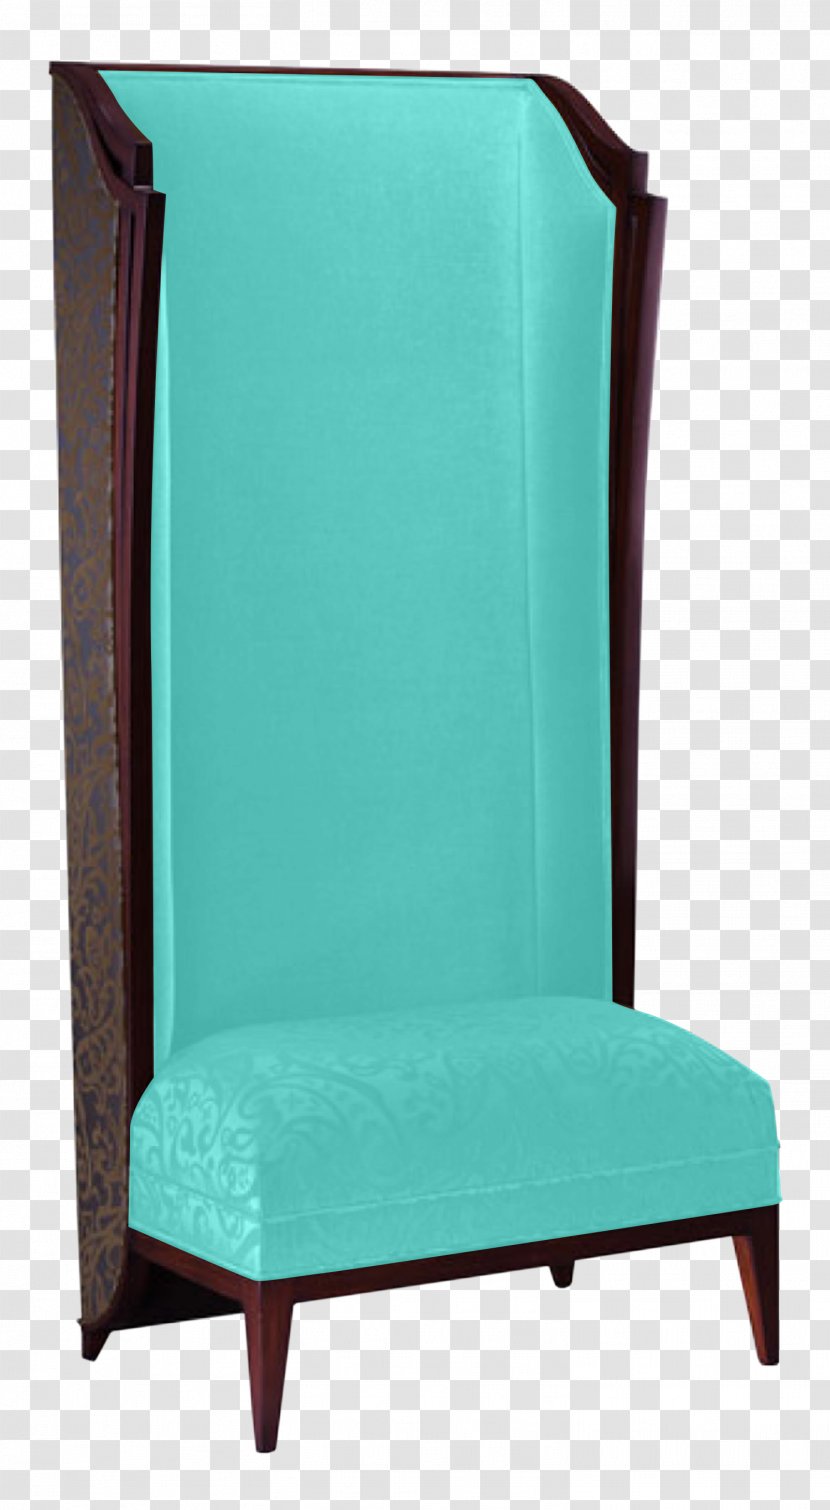 Chair Angle - Turquoise Transparent PNG